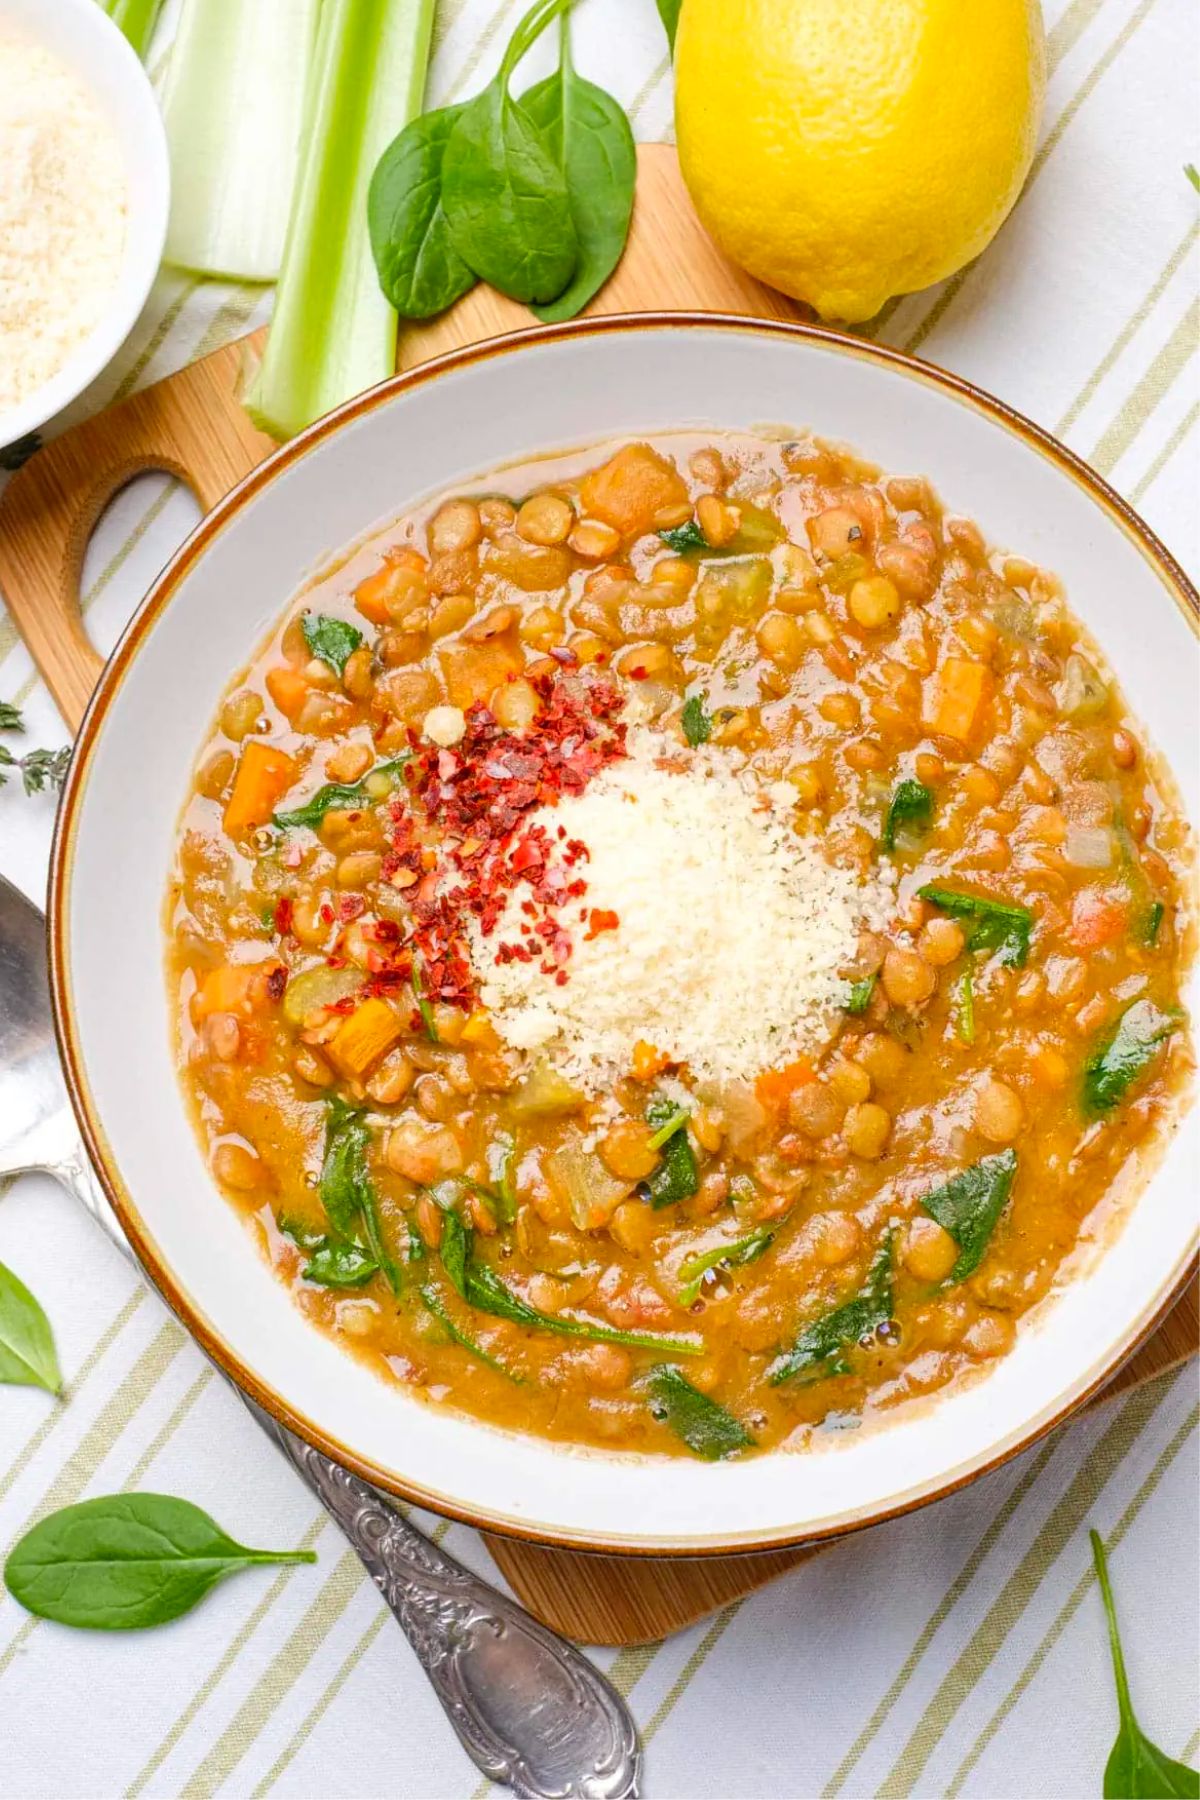 Are Lentils Gluten Free Food? What You Need to Know + Recipe